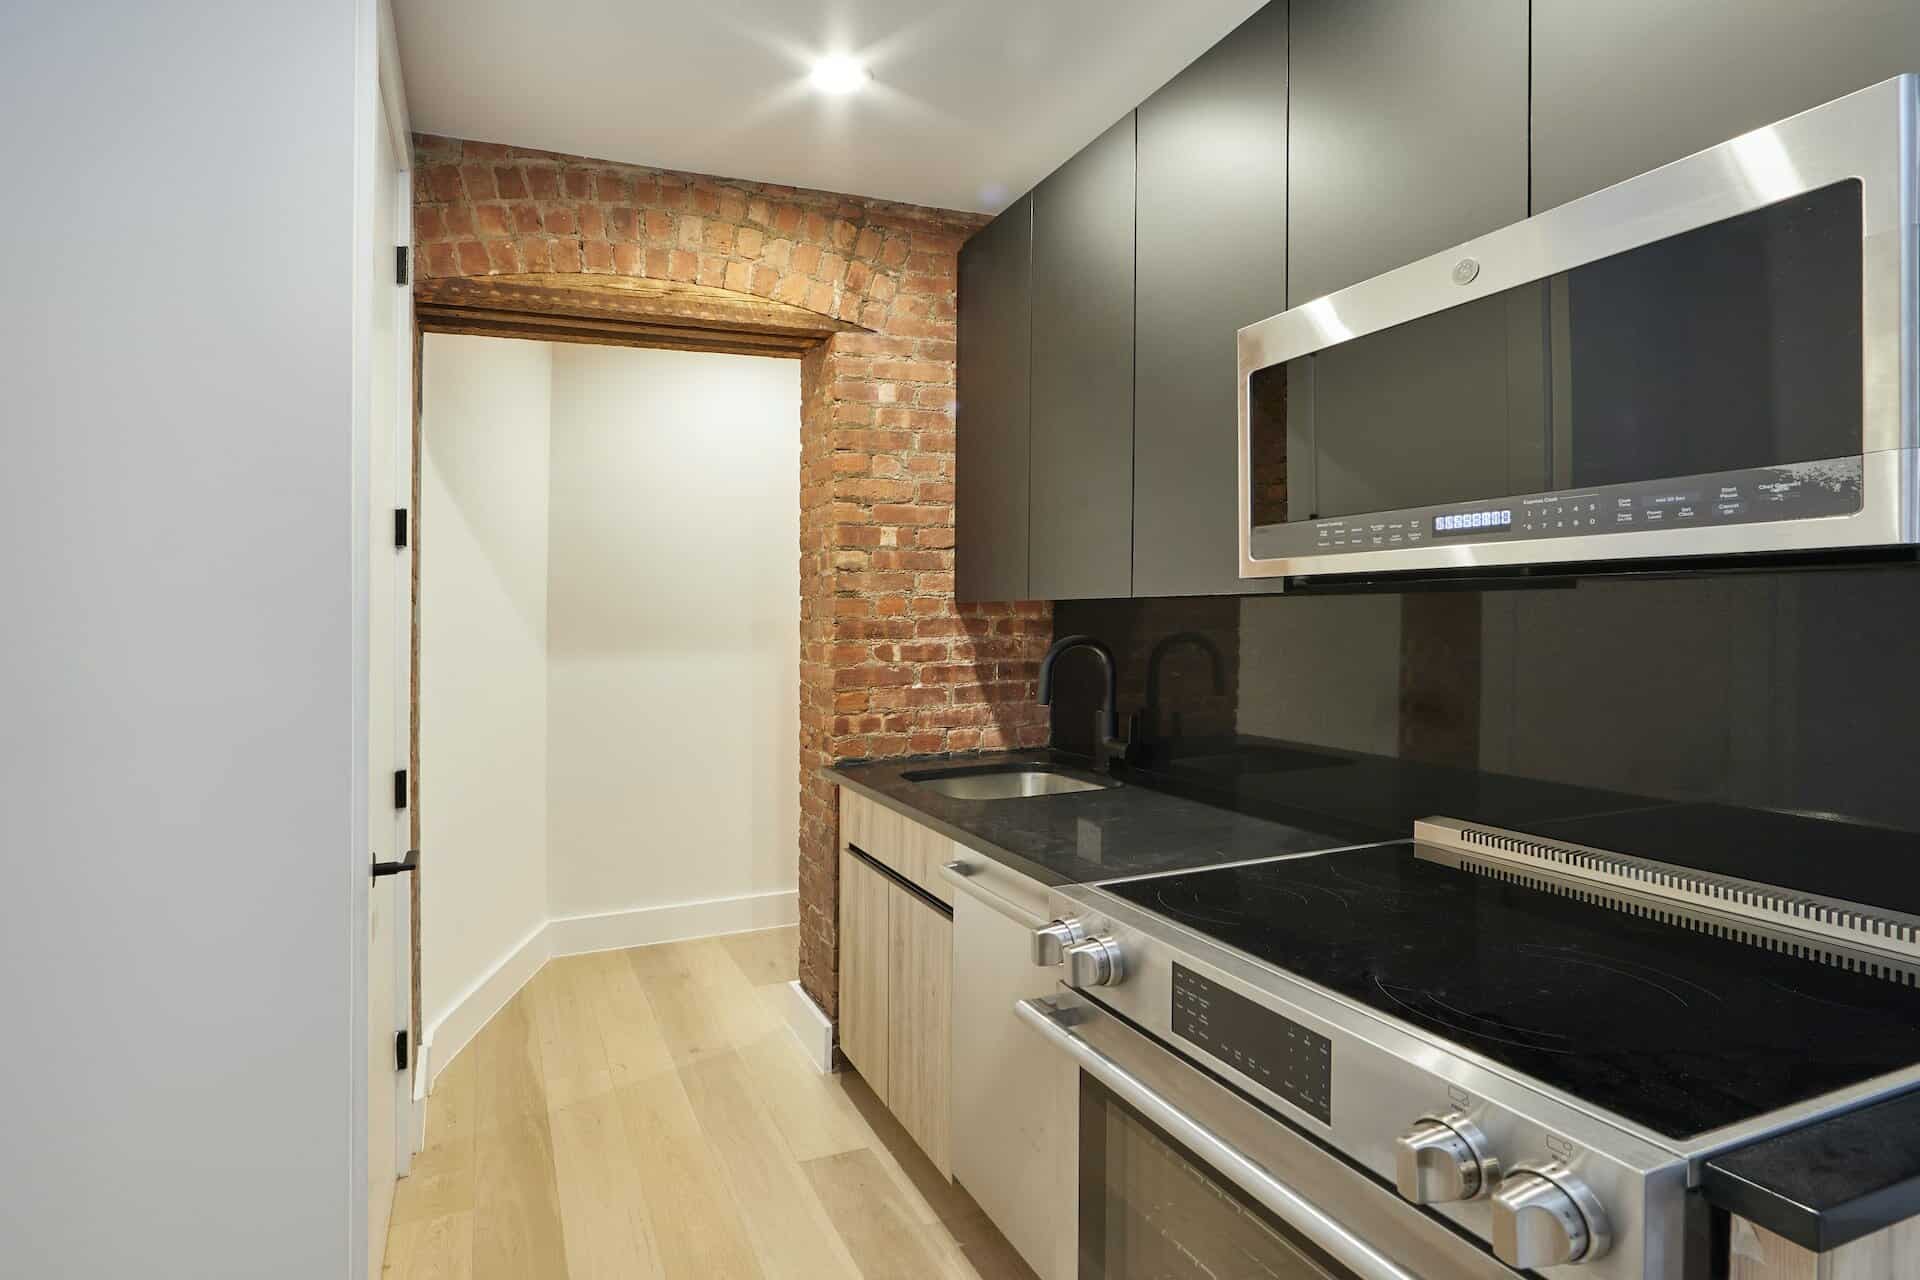 Kitchen at 207 East 33rd Street apartments with dark grey countertops, stainless steel appliances and hardwood floors.